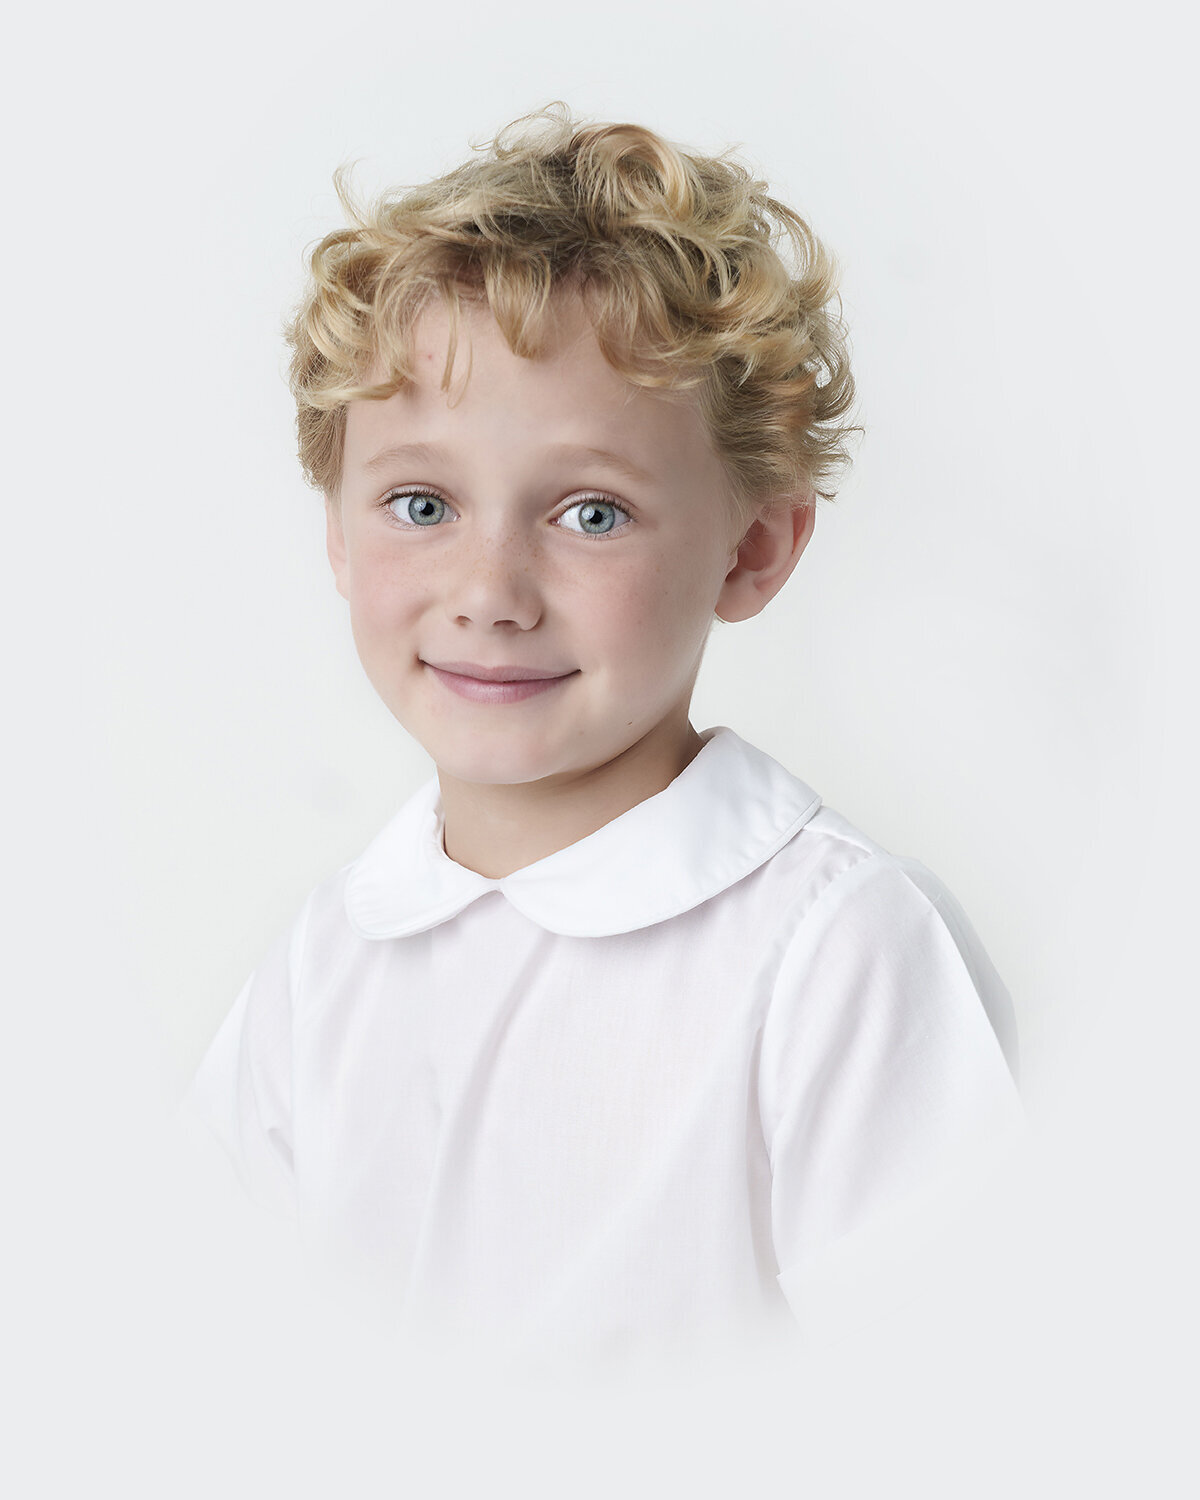 6 year old boy photographed in the southern heirloom bust portrait style with a peter pan collar shirt from The Bailey Boys